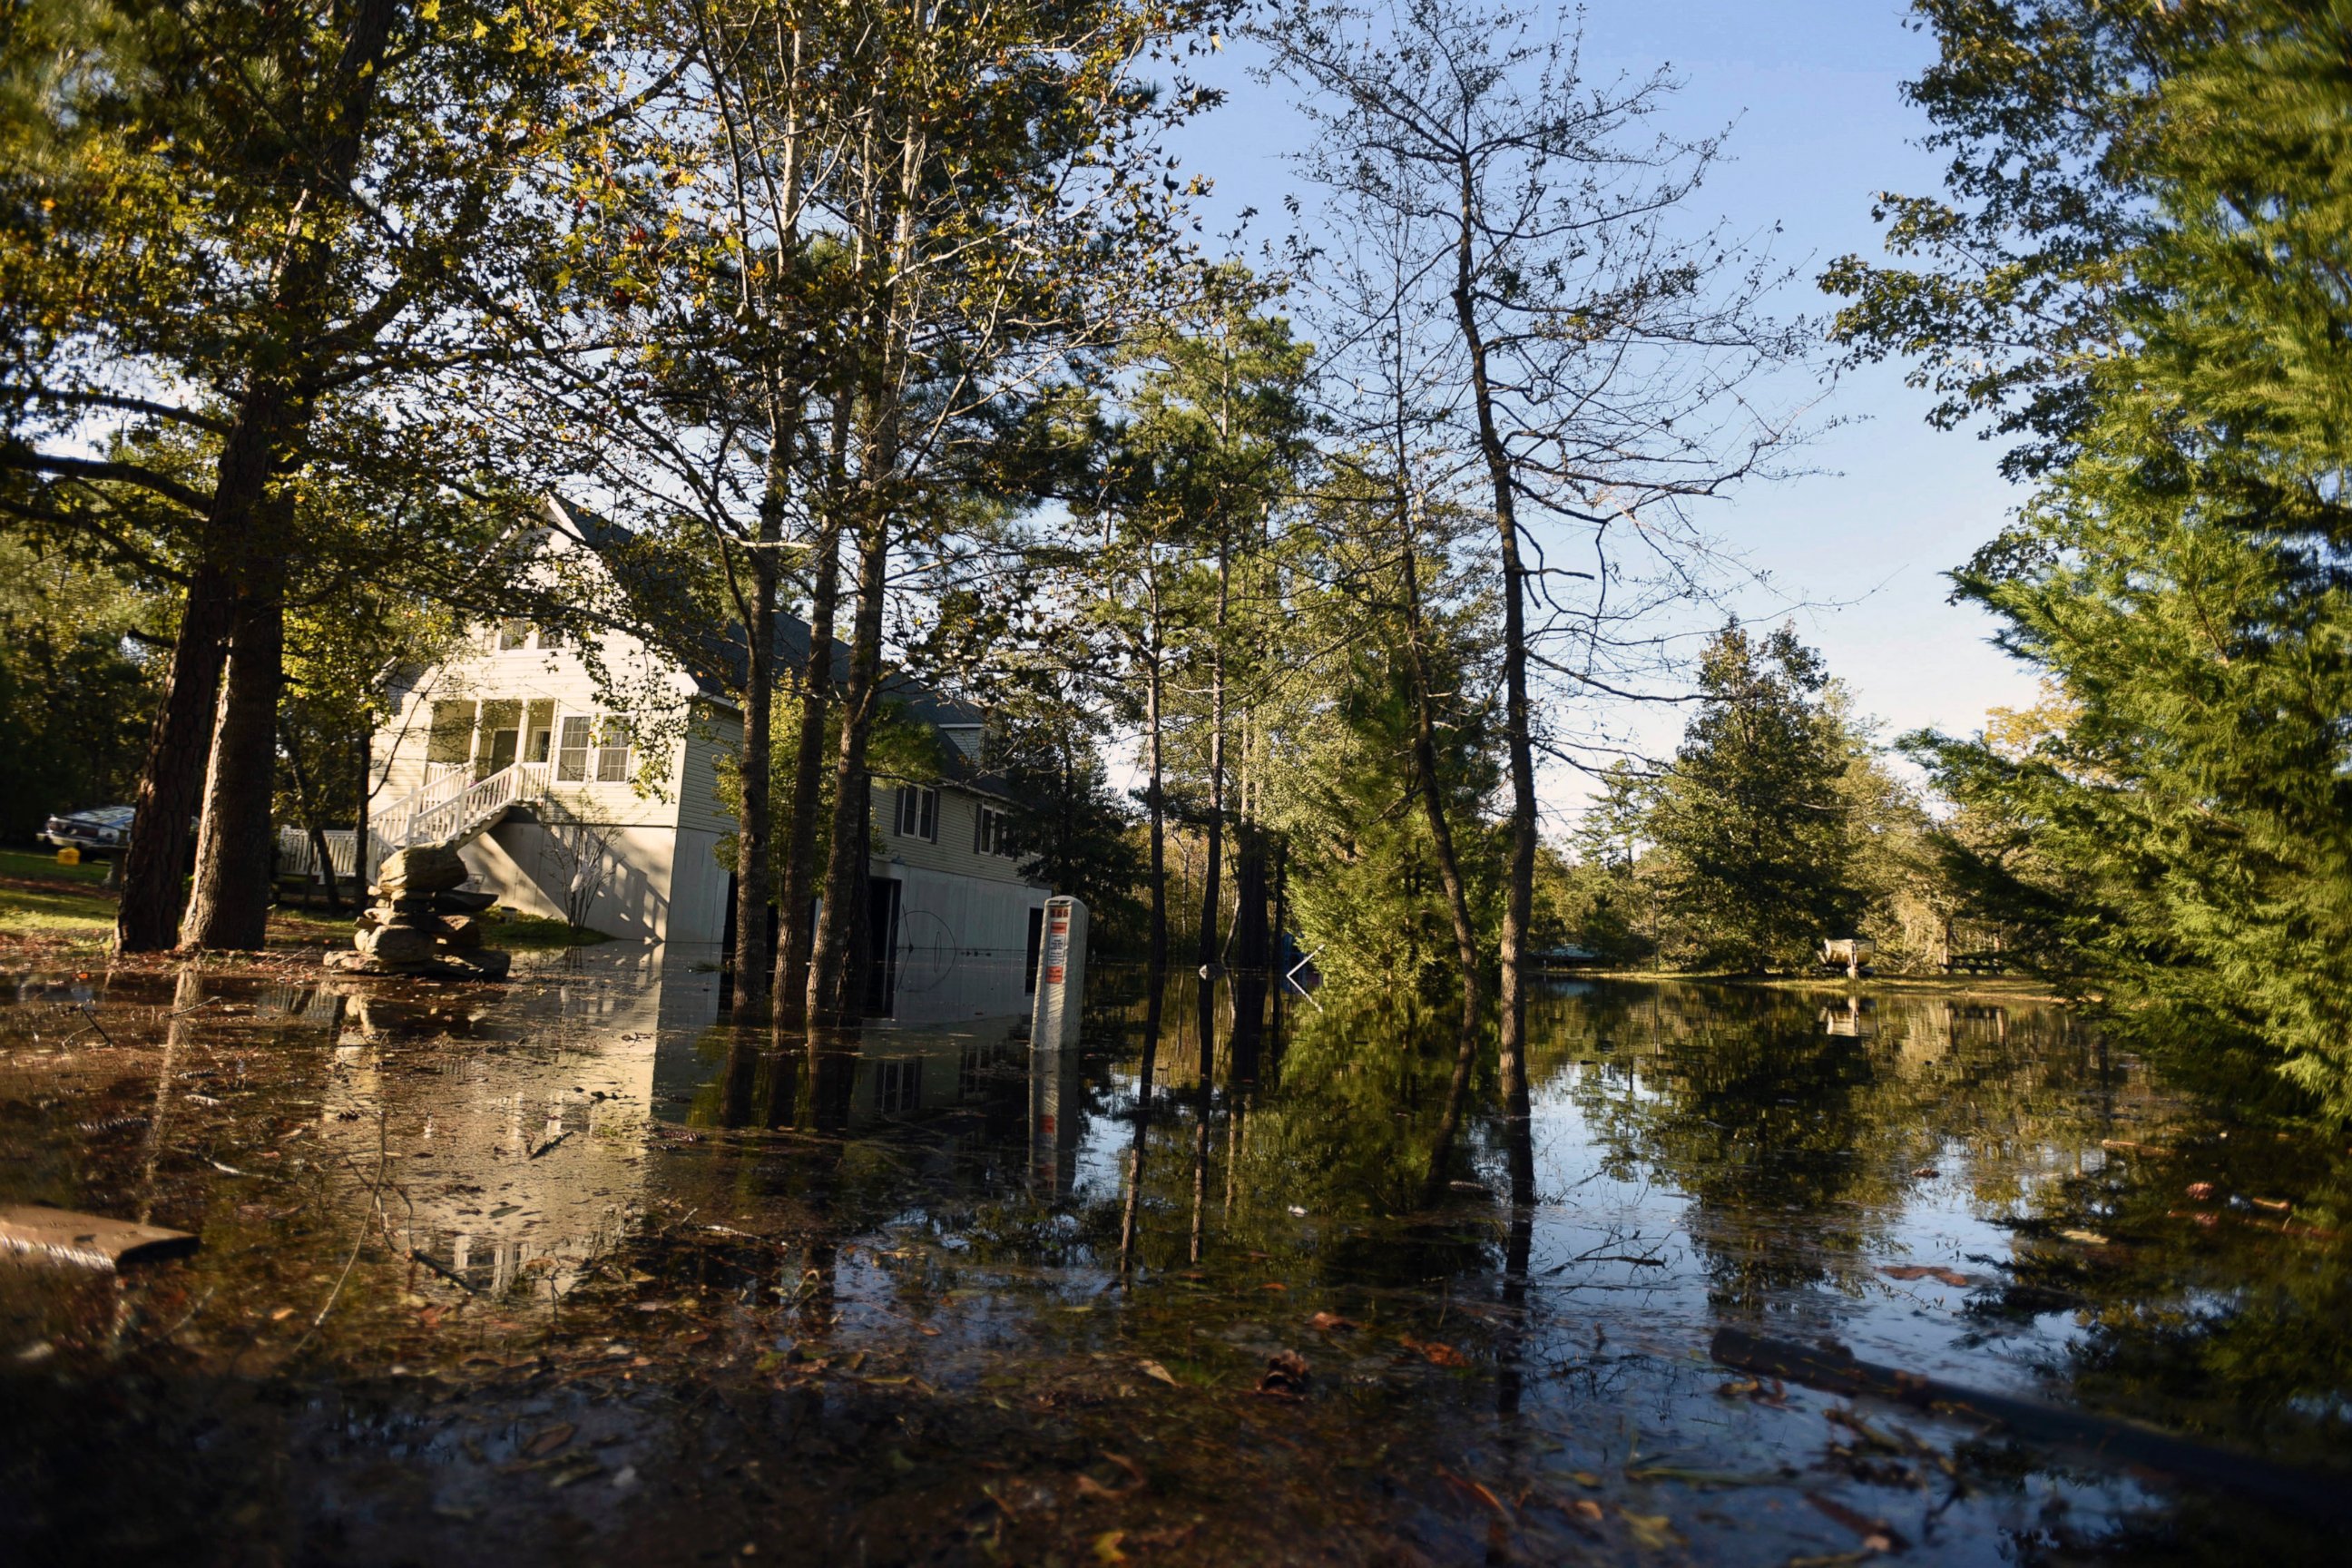 PHOTO: Flood waters begin to come into the yards of homes along Wido Moore Drive, Oct. 11, 2016 in Currie, North Carolina.